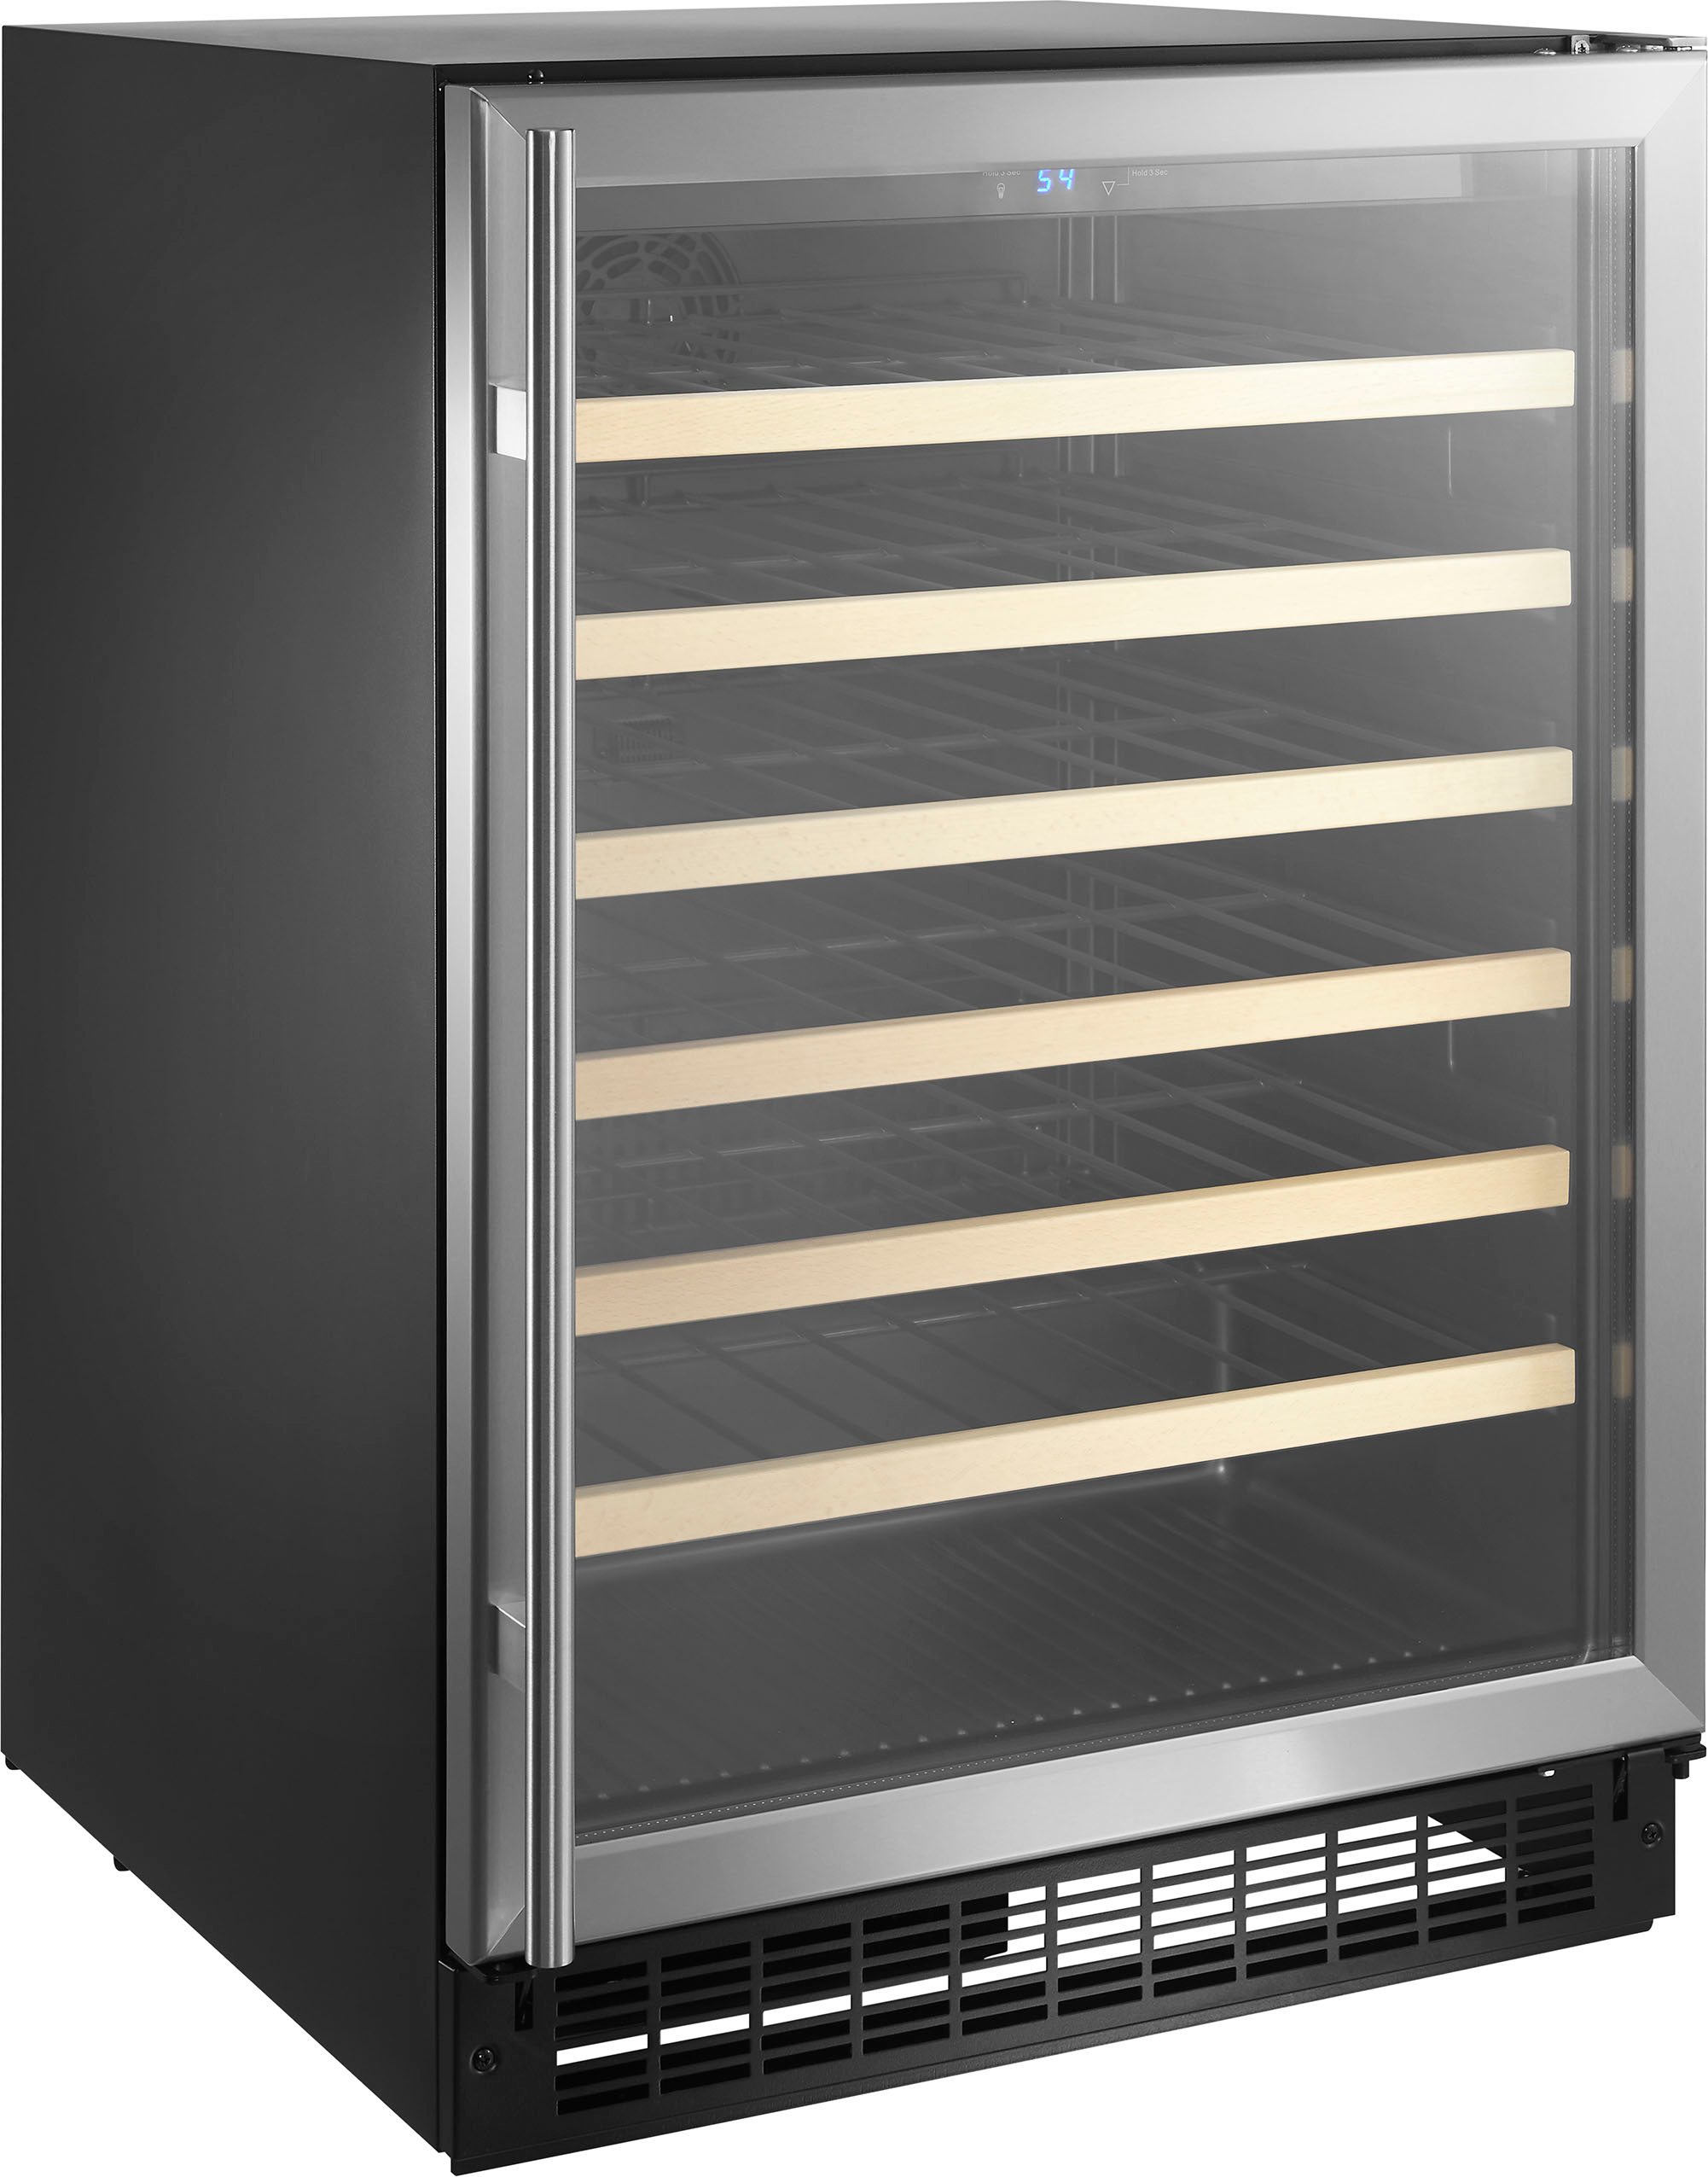 Angle View: NewAir - 27-Bottle Wine Cooler - Stainless Steel